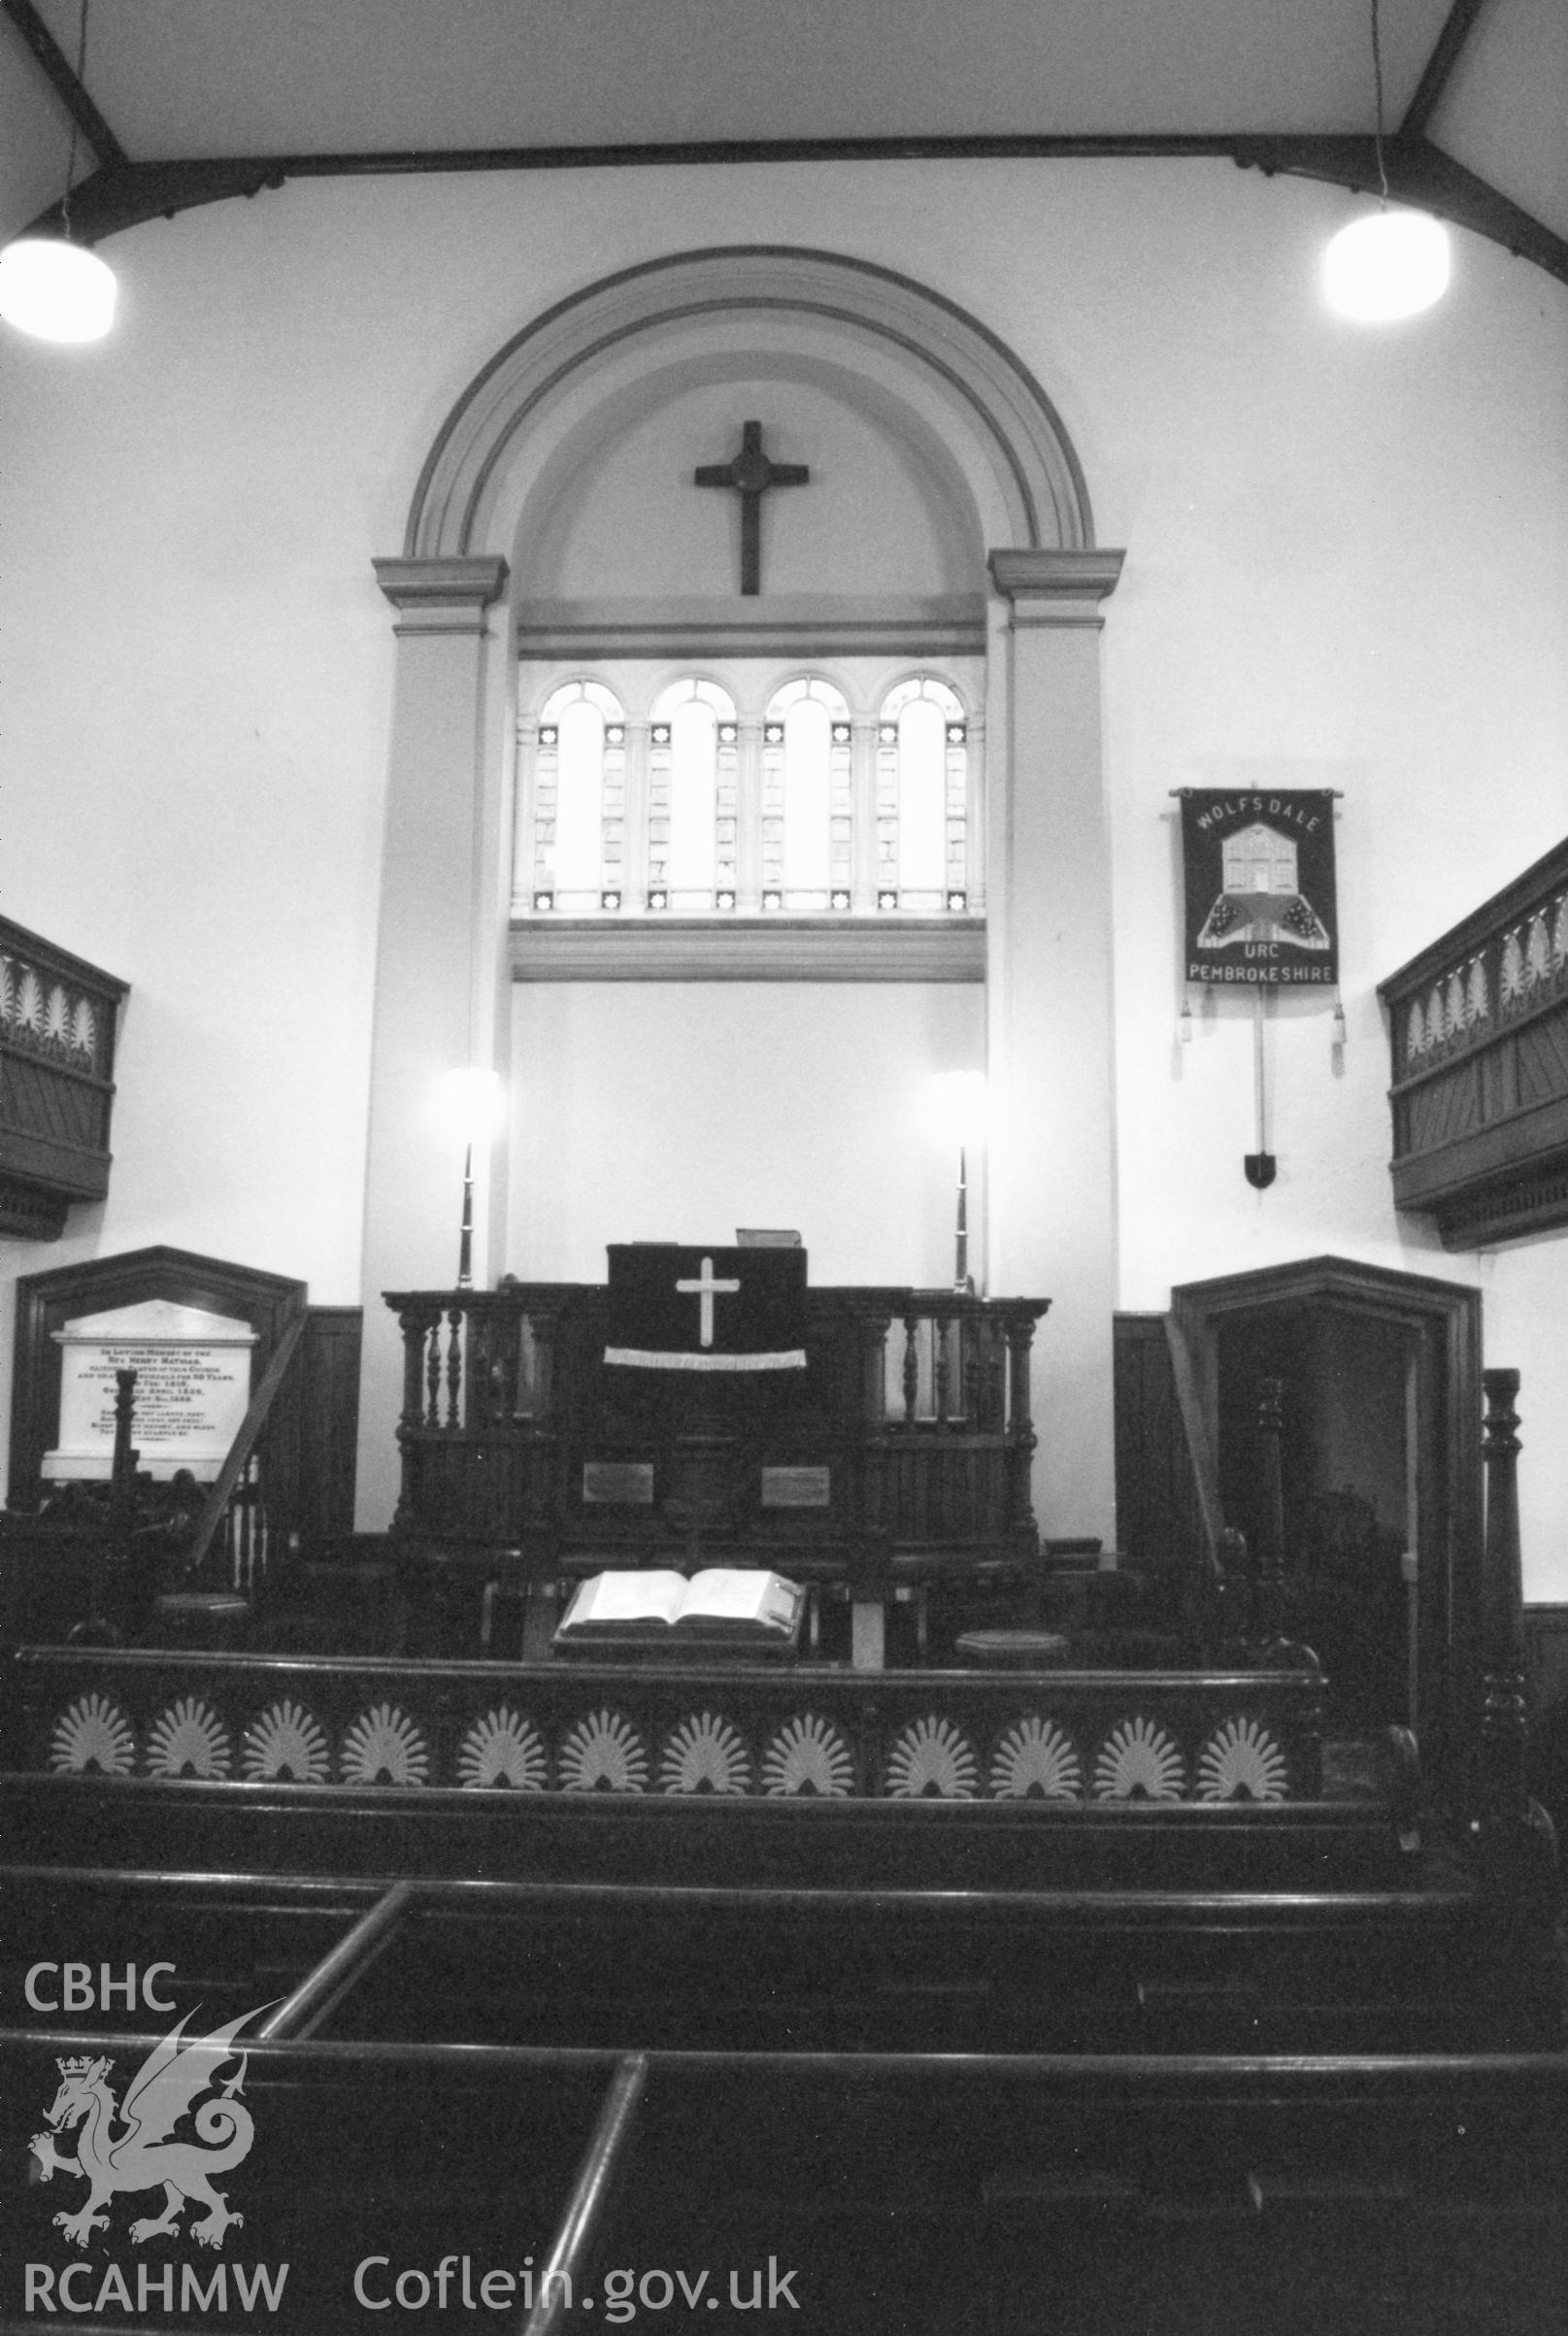 Digital copy of a black and white photograph showing exterior view of Bethel Independent Chapel, Wolfsdale, taken by Robert Scourfield, 1996.